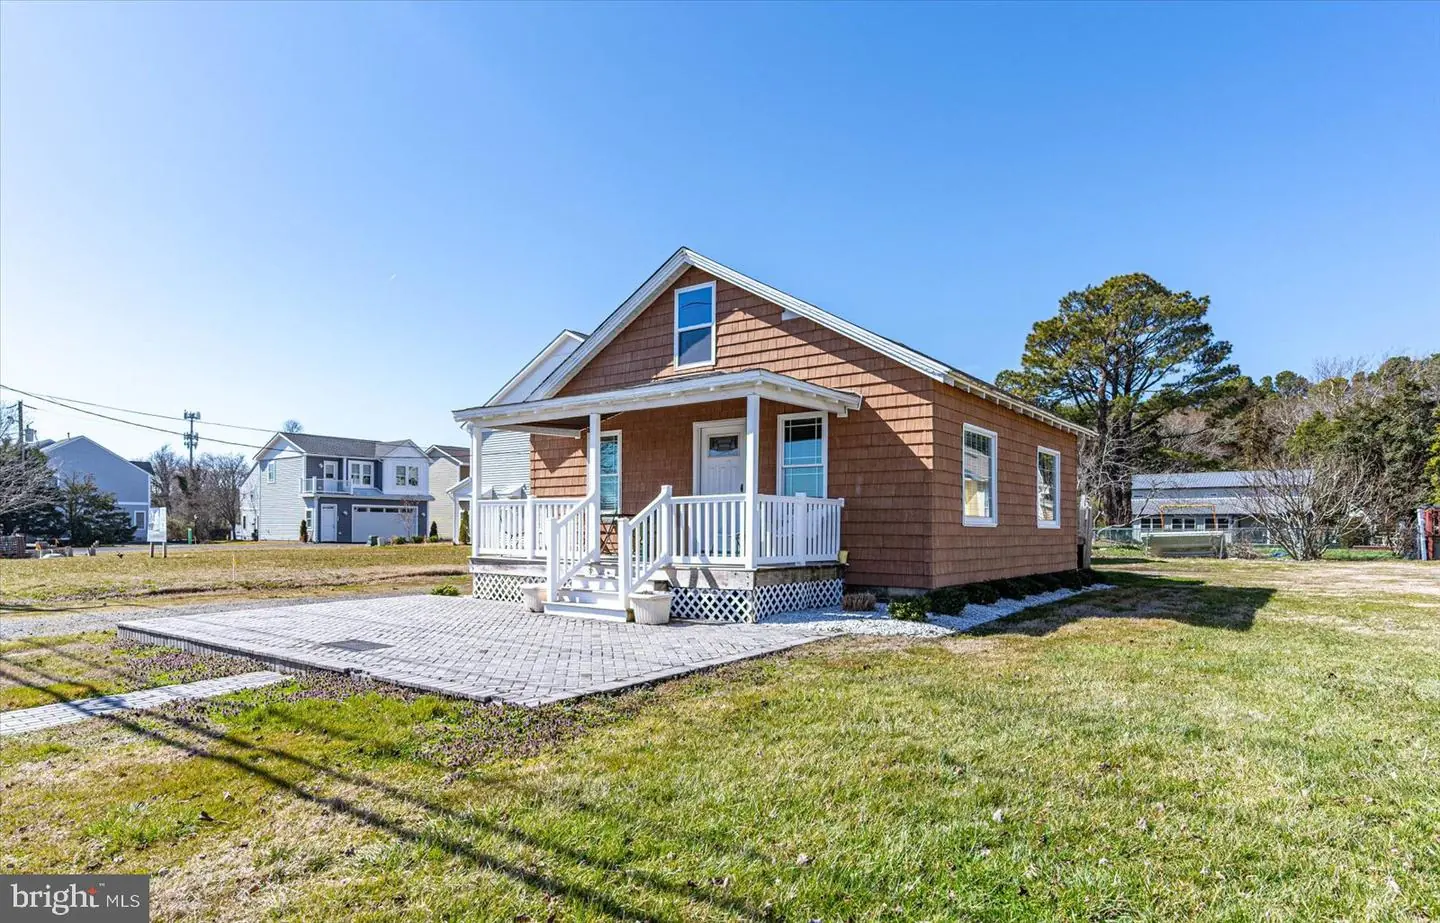 MDWO2019446-802902725864-2024-03-07-00-07-58 9801 / 9805 Golf Course Rd | Ocean City, MD Real Estate For Sale | MLS# Mdwo2019446  - 1st Choice Properties